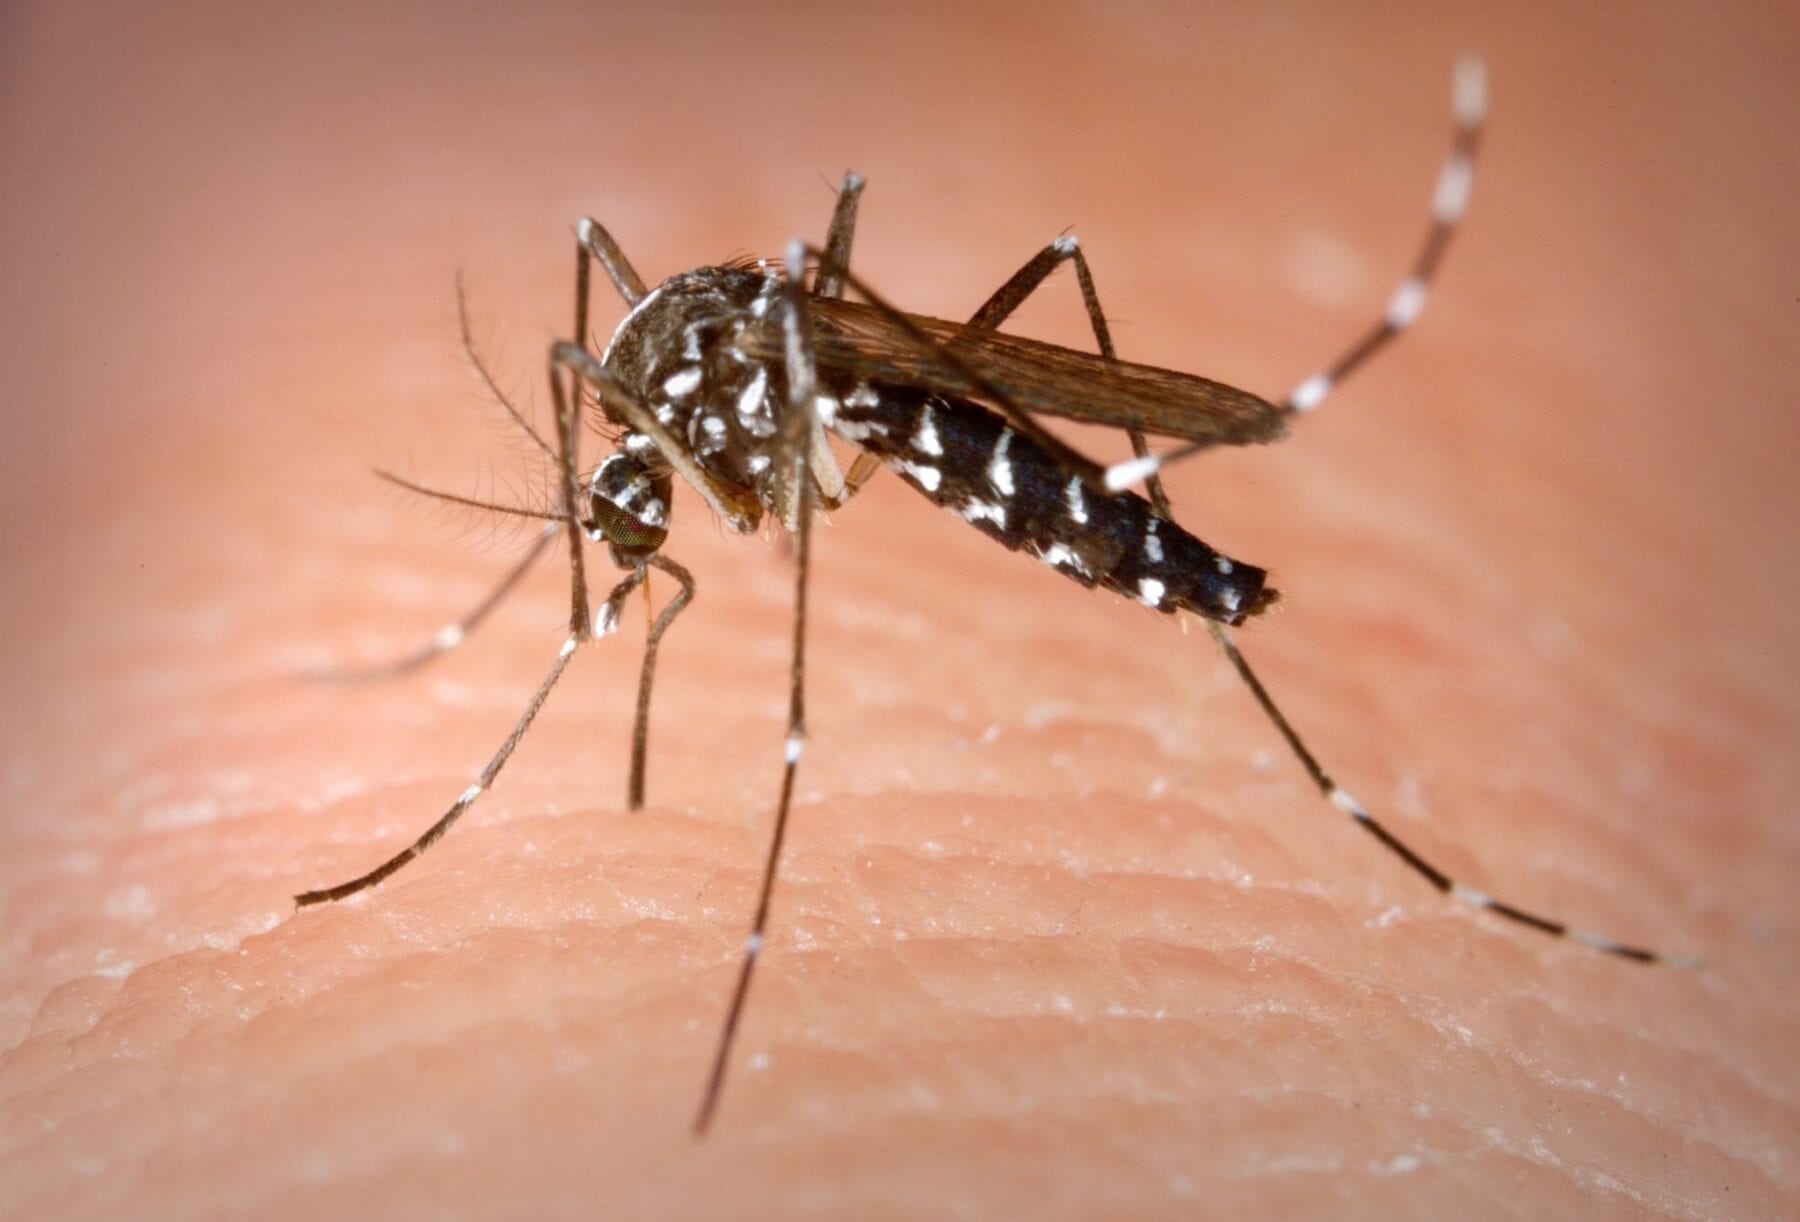 Zika traces found in Asian tiger mosquito in Brasil raises concerns around virus transmission